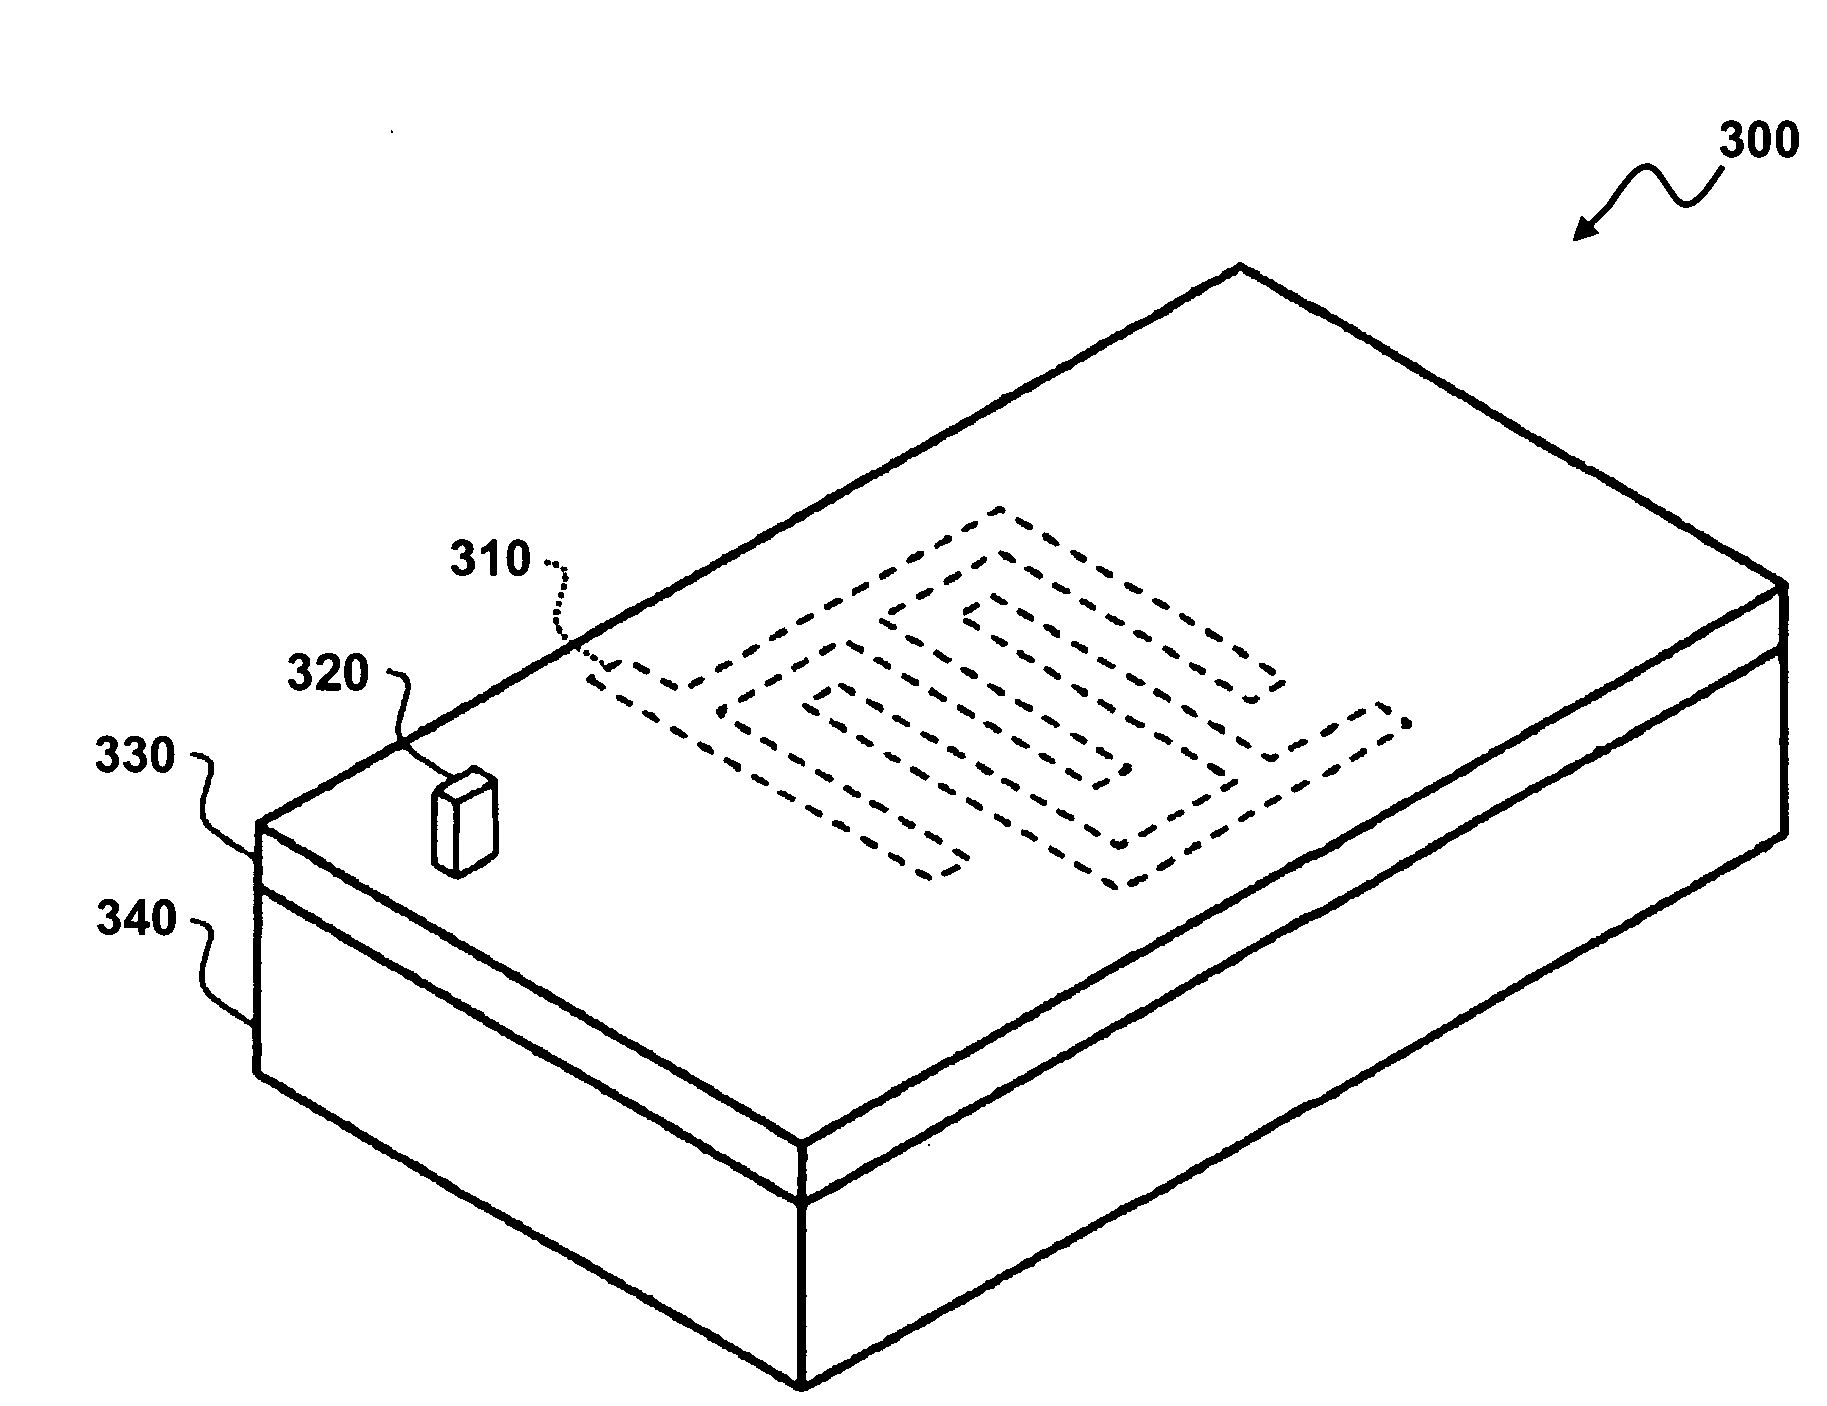 Mechanical packaging of surface acoustic wave device for sensing applications